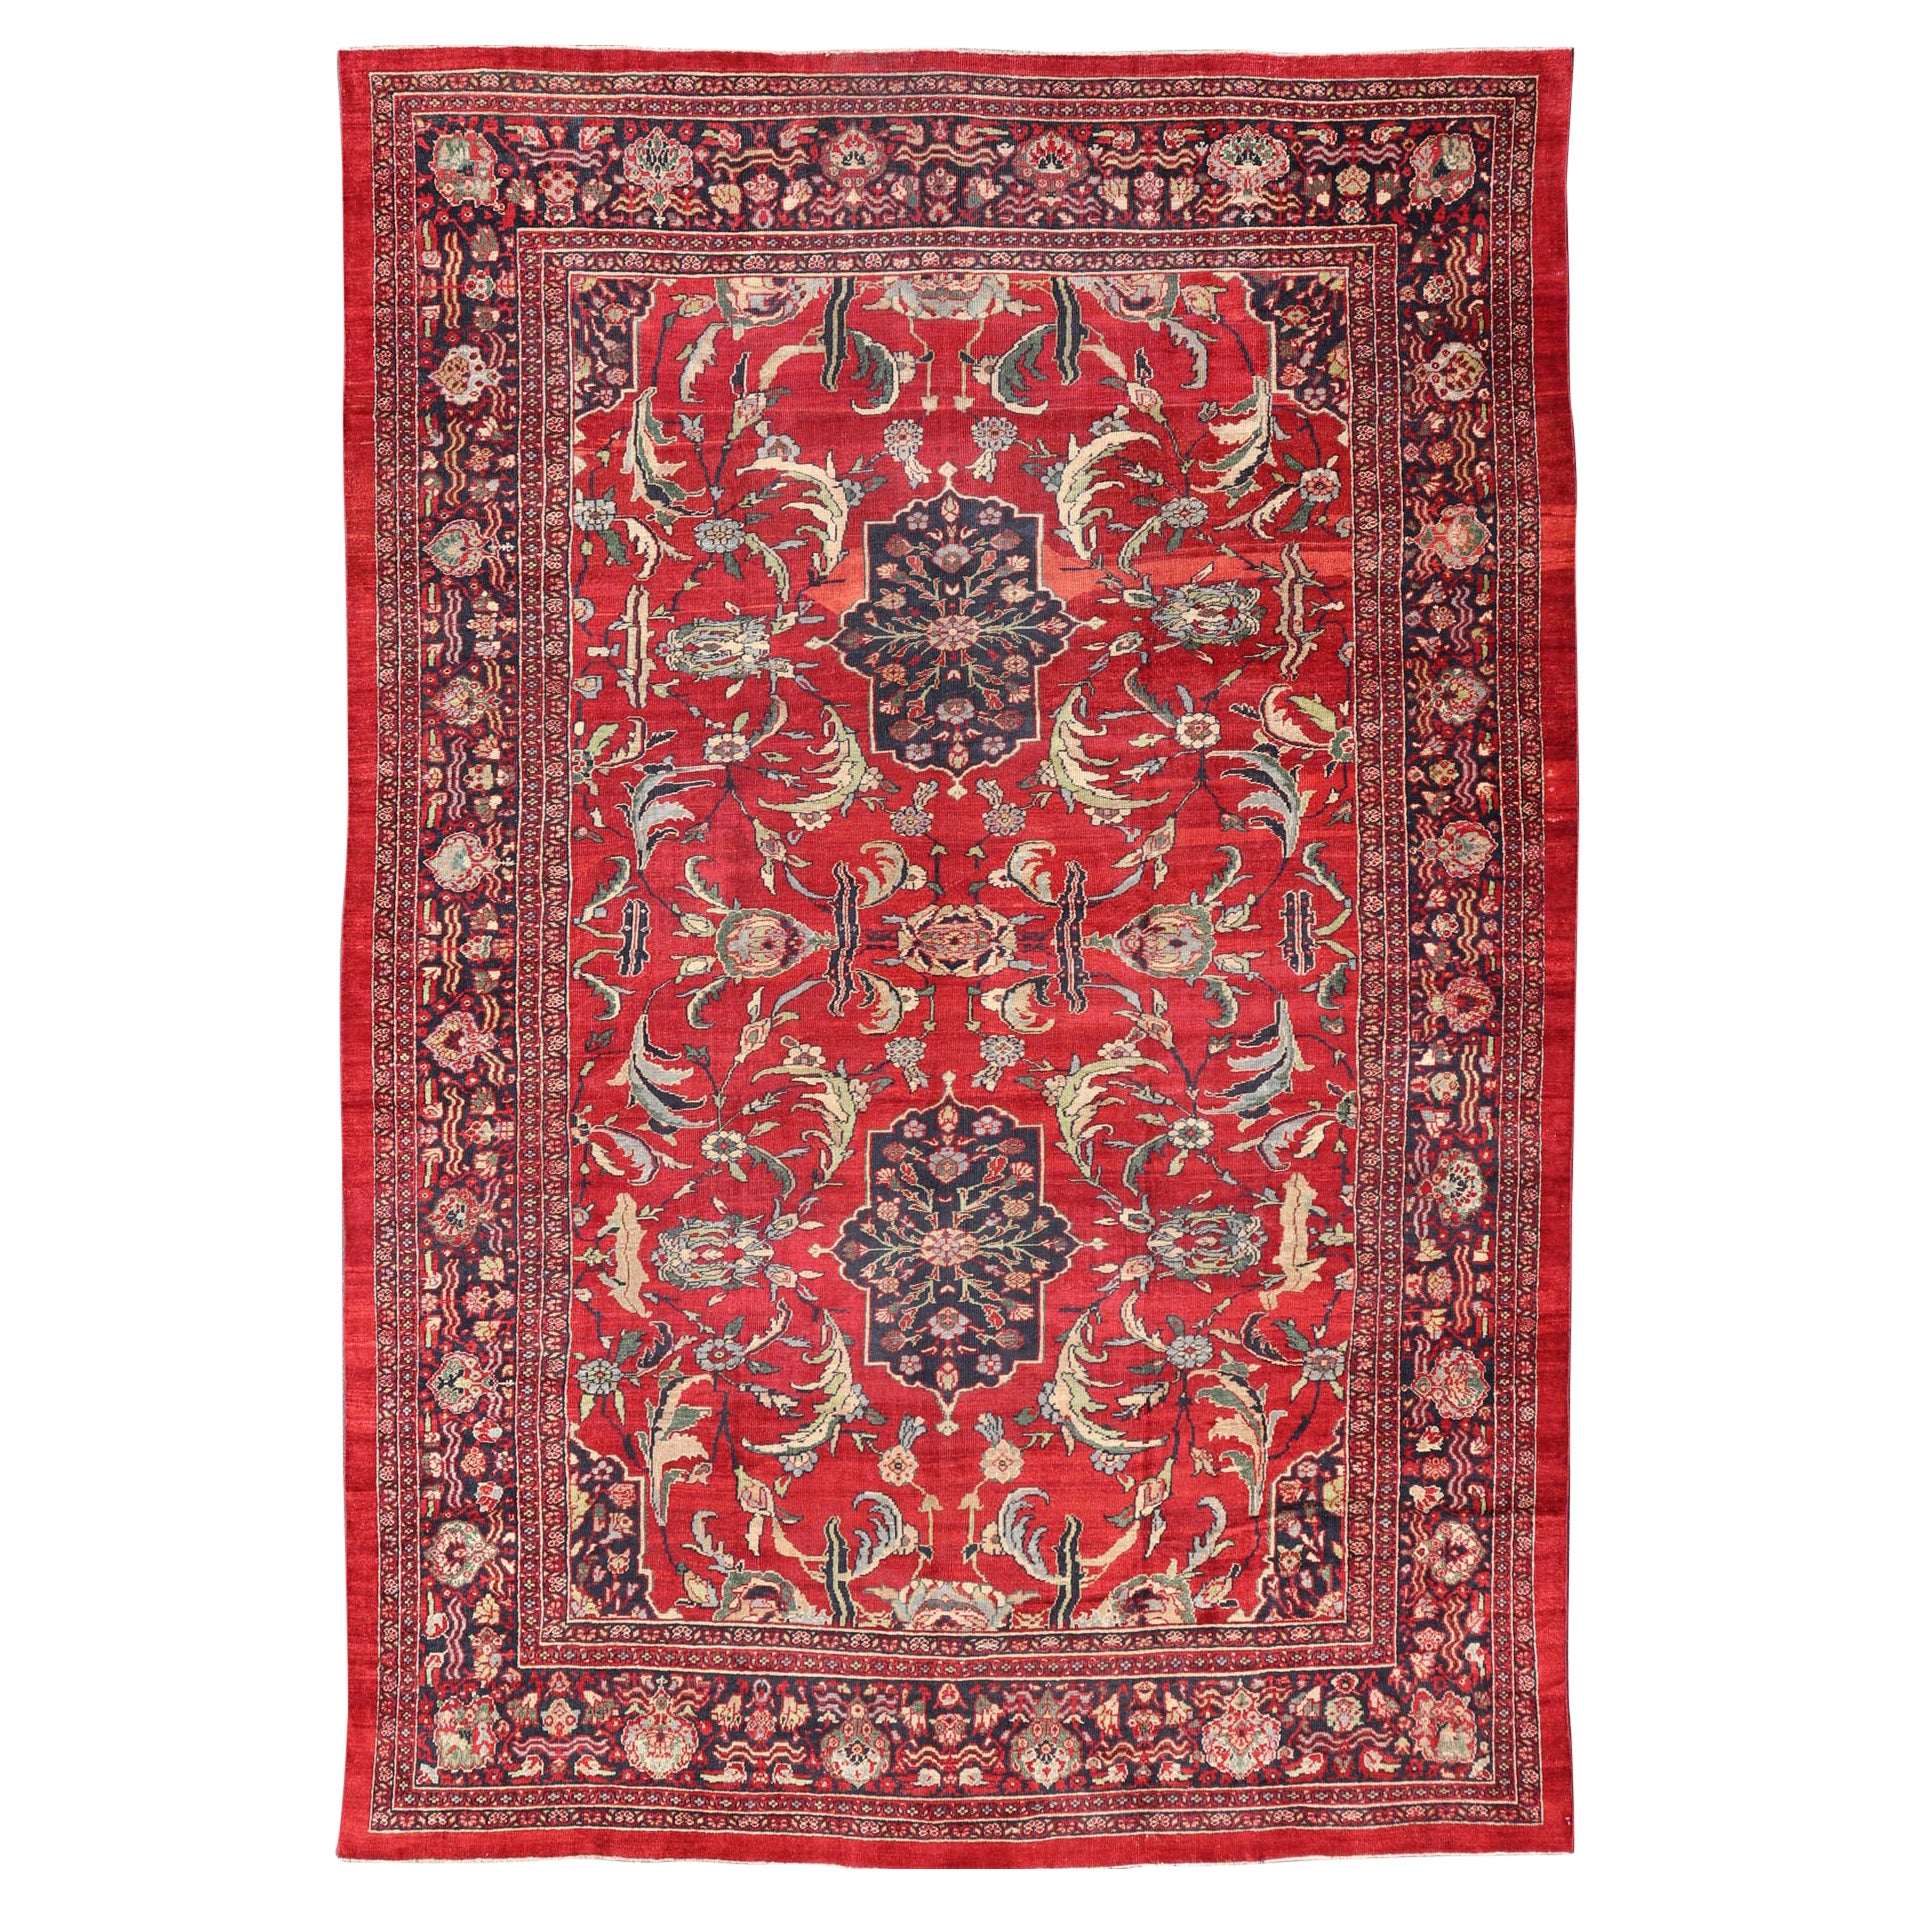 Antique Persian Zeigler Sultanabad Rug with Botanical Elements Set on Red Field For Sale